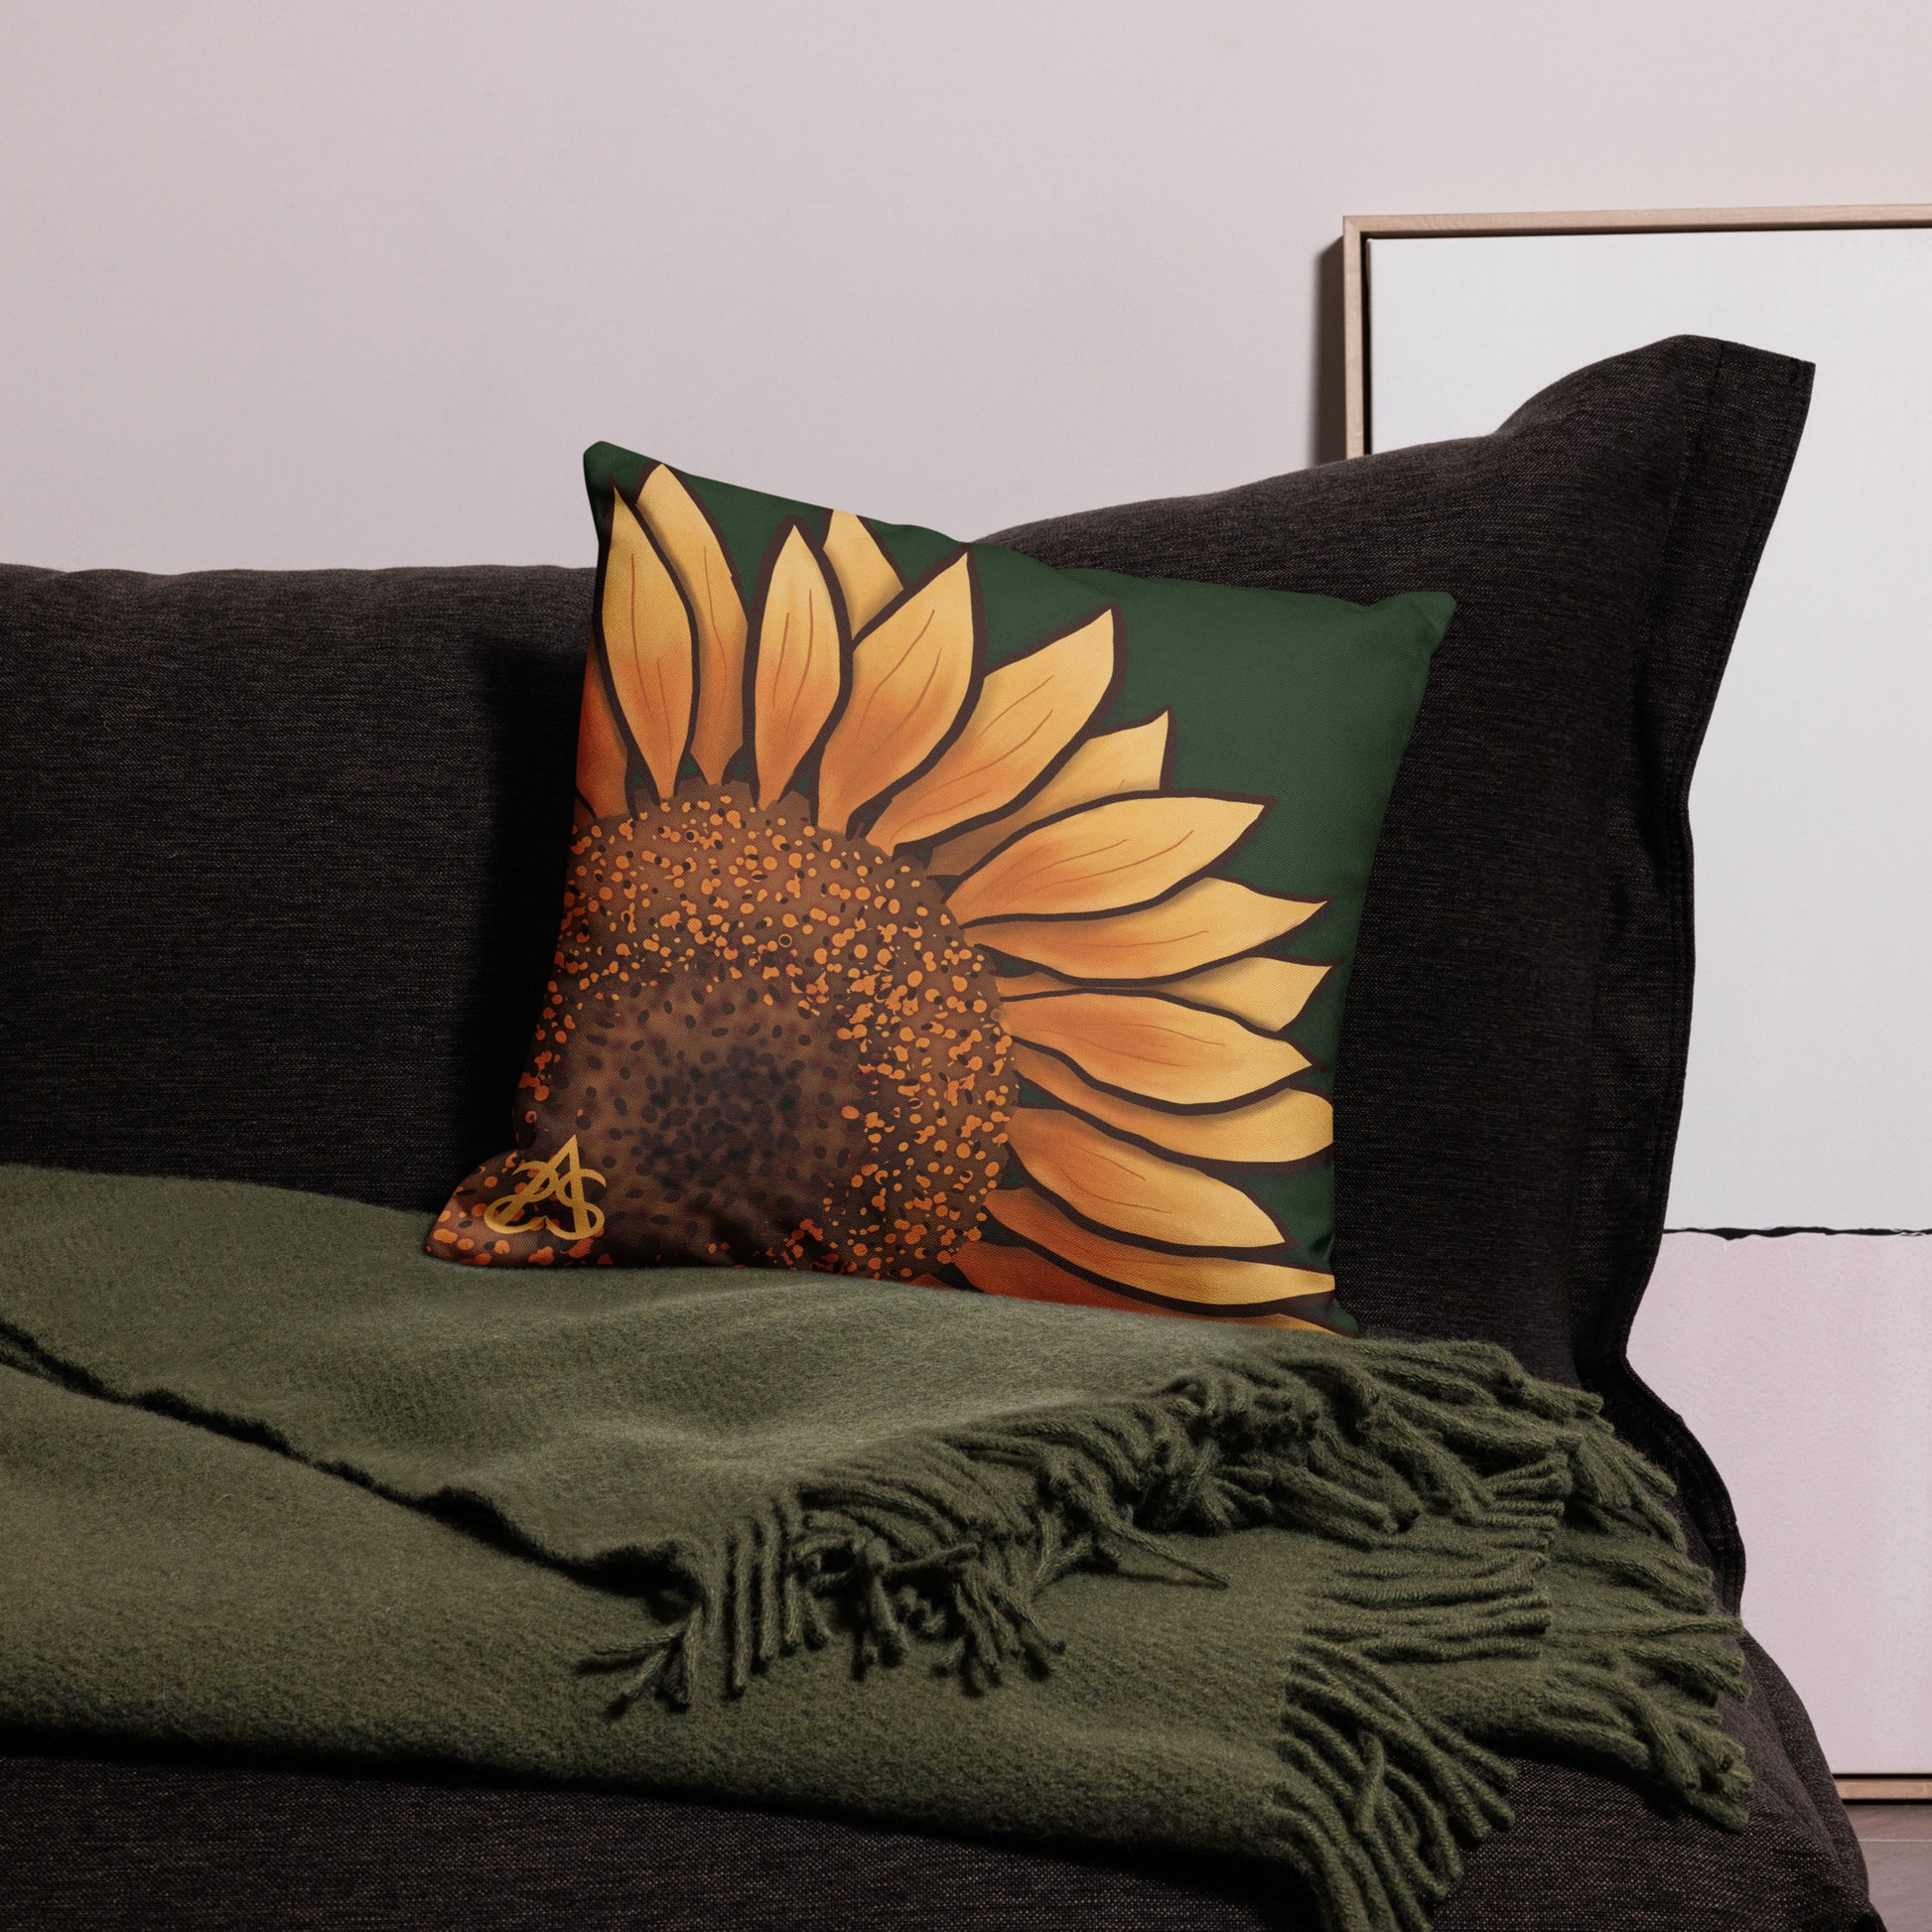 A medium sized square pillow with a hand painted sunflower by Aras Sivad on a dark green background.